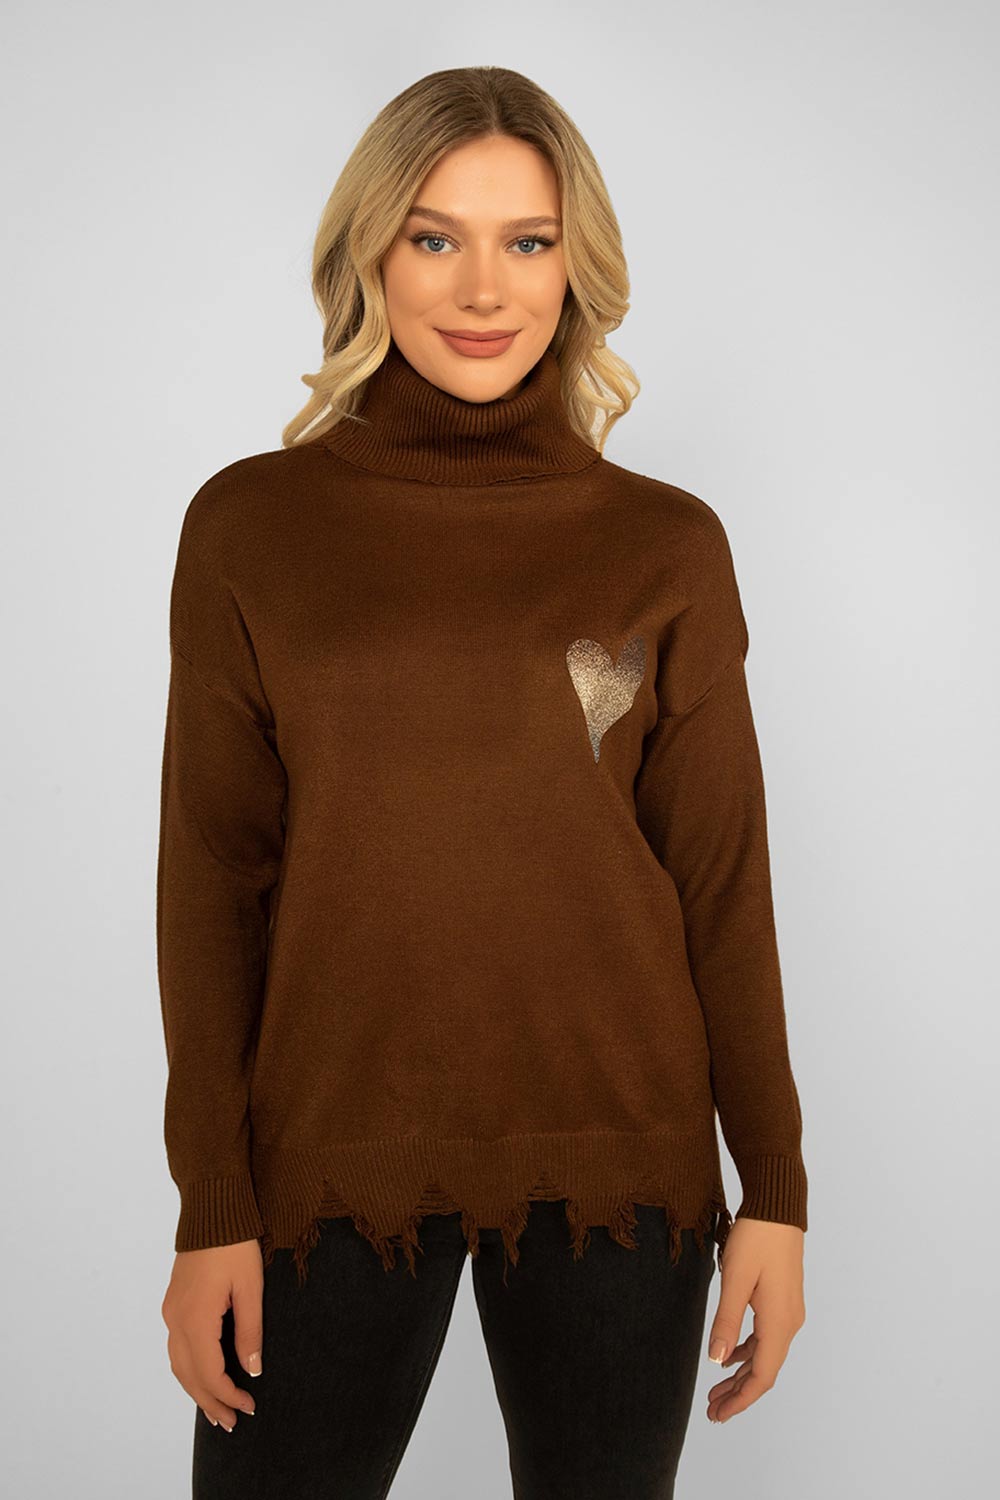 Women's Clothing ELISSIA (LV8072-1) Turtleneck Ripped Hem Heart Sweater in CHOCOLATE